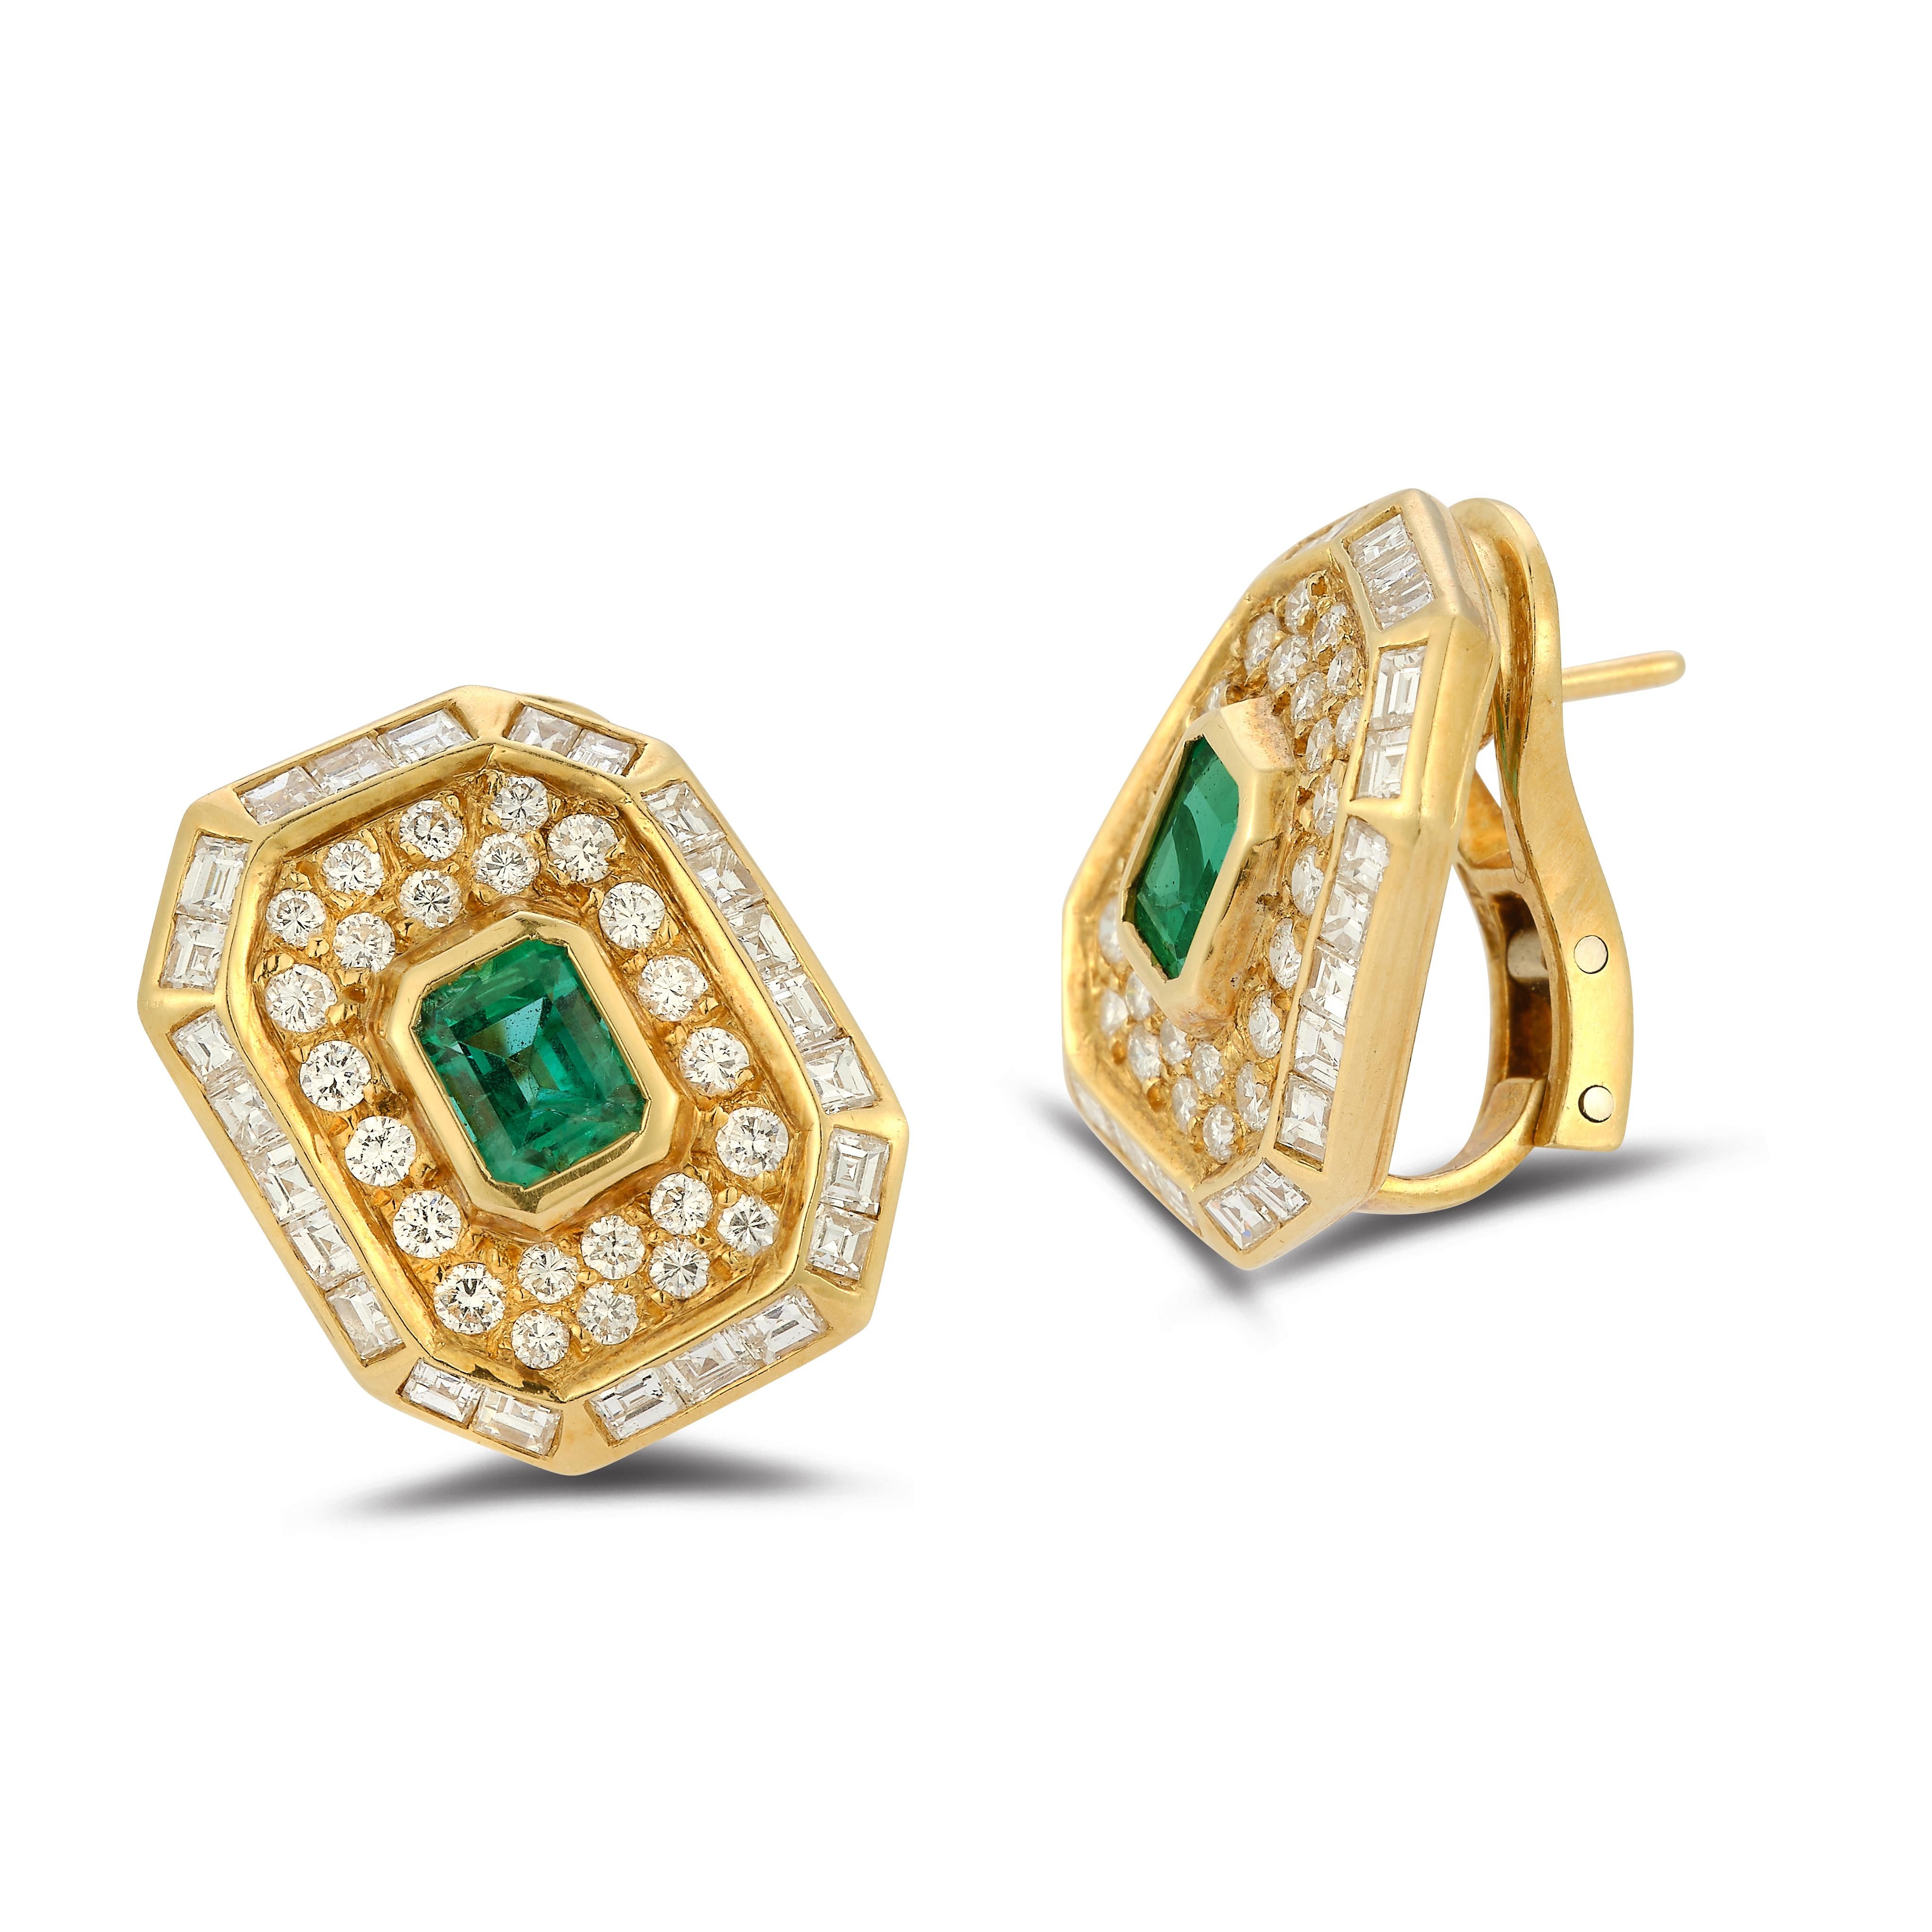 Emerald & Diamond Earrings In Excellent Condition For Sale In New York, NY